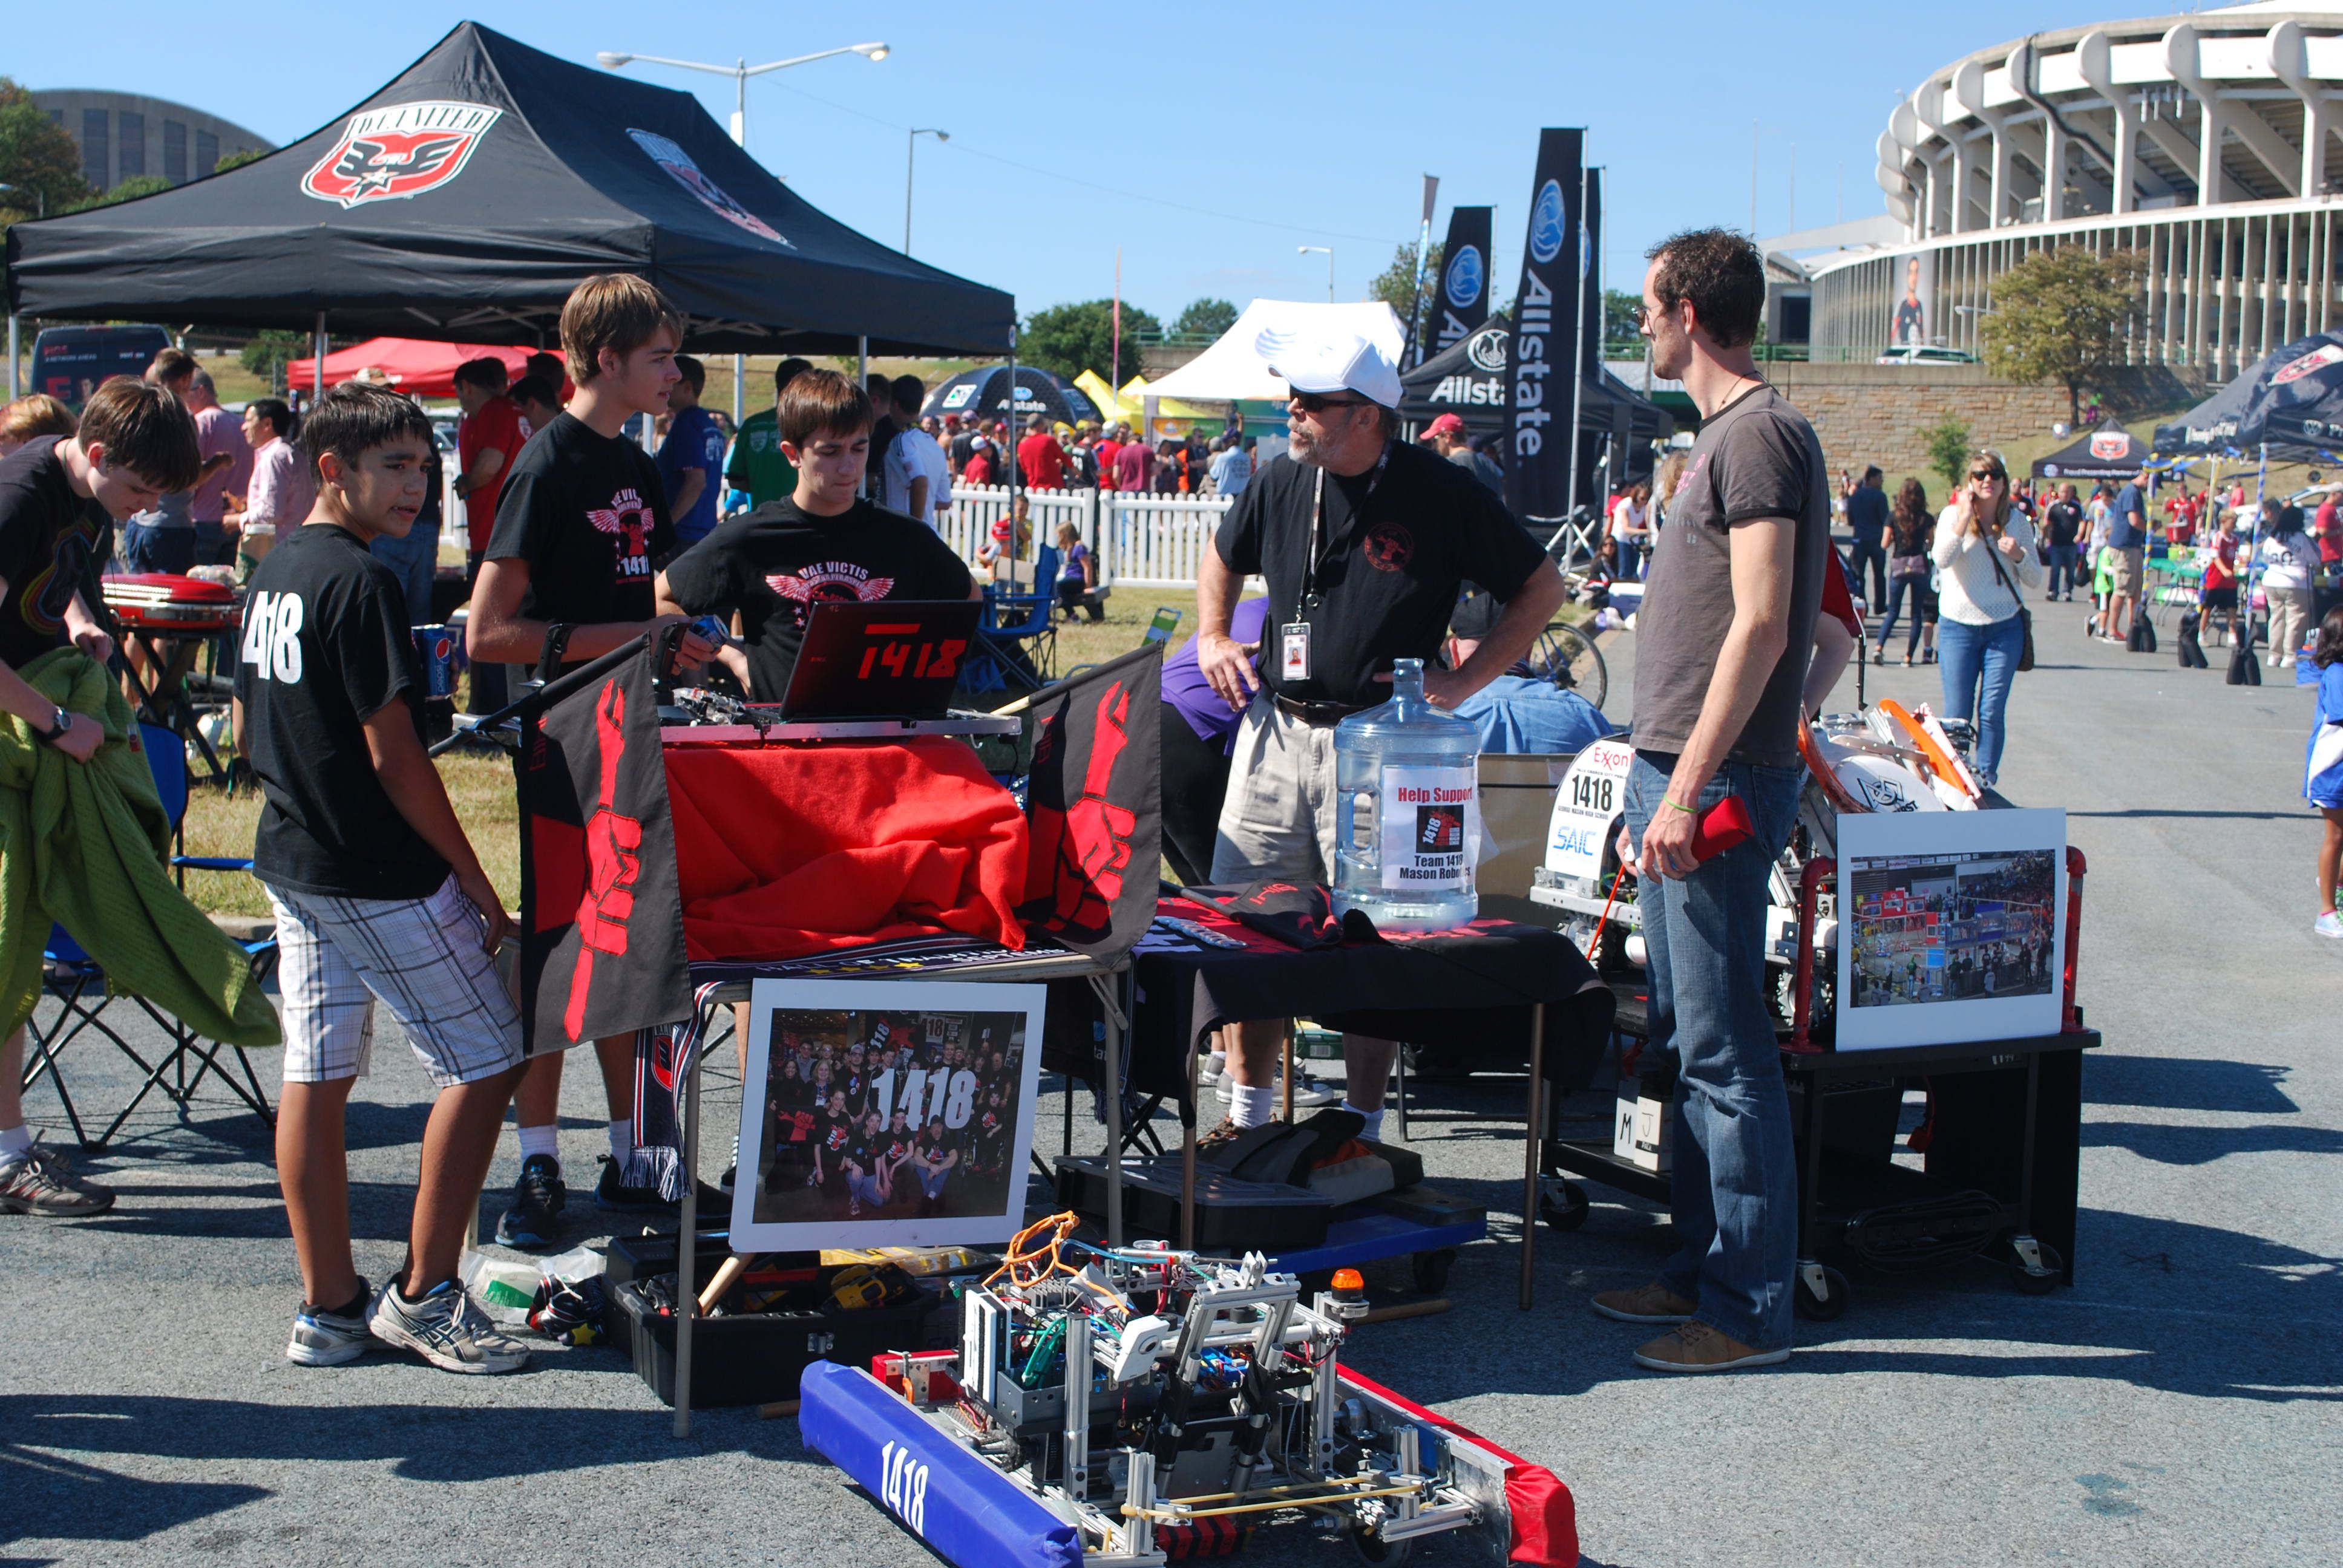 The team talking to an adult at a stand, with the robot in front.